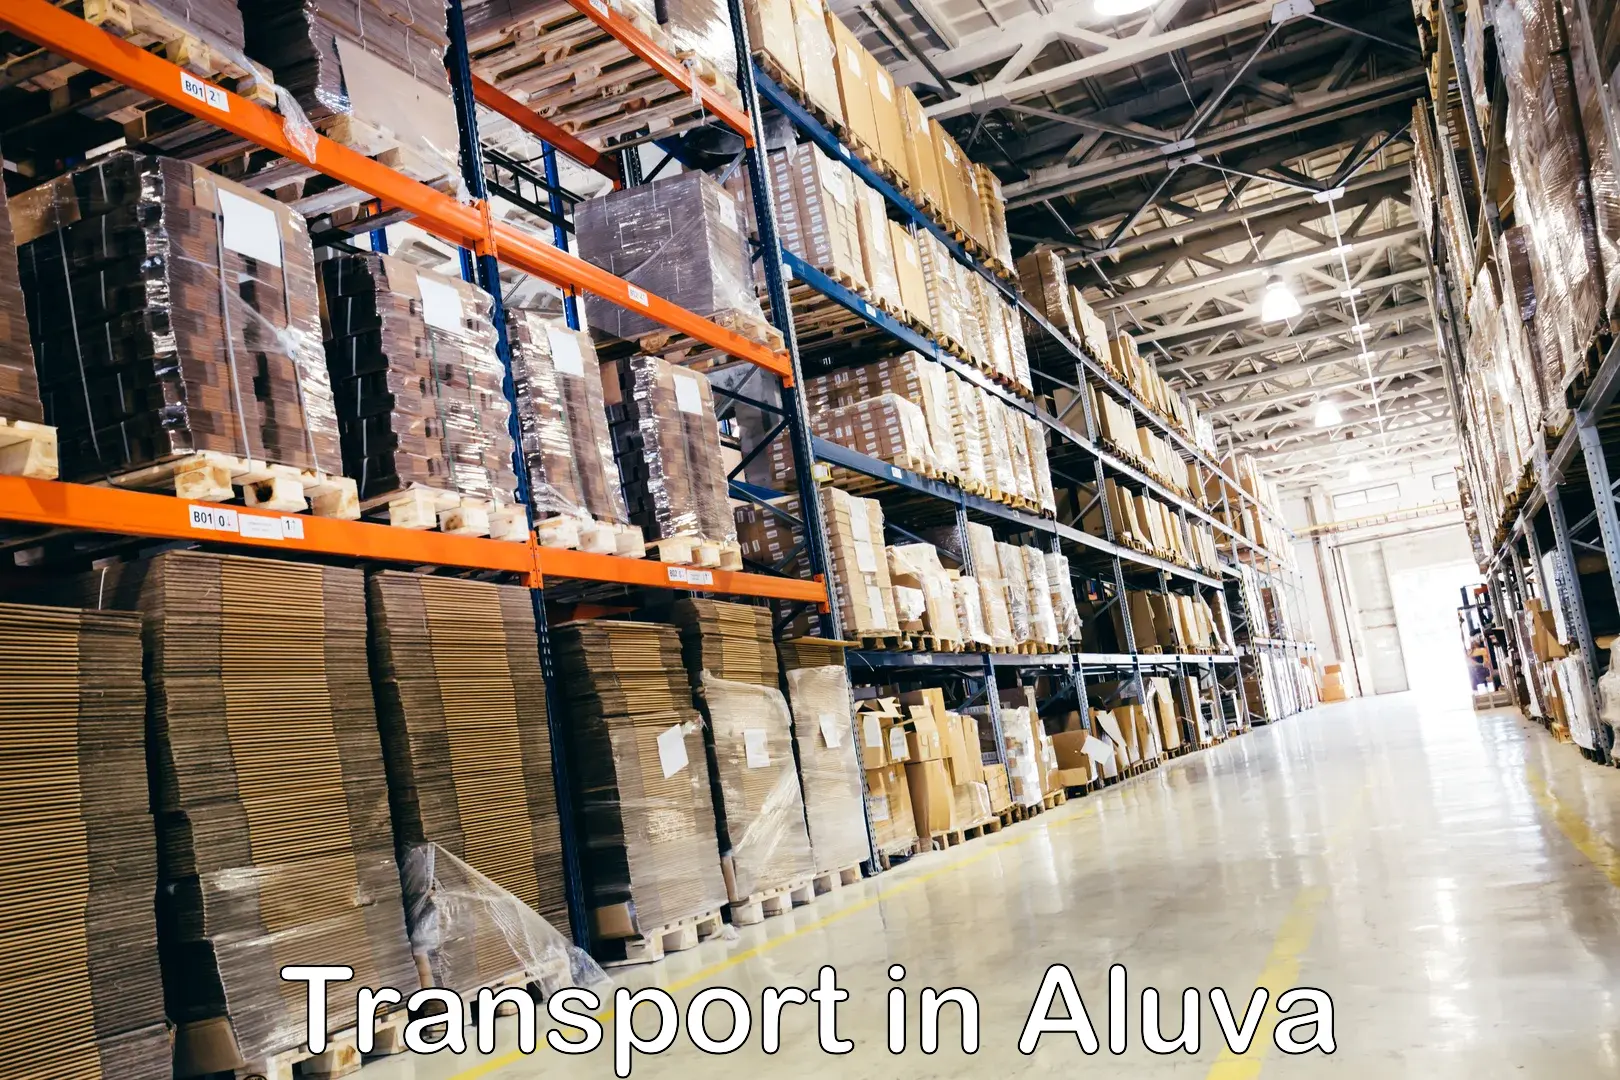 Express transport services in Aluva